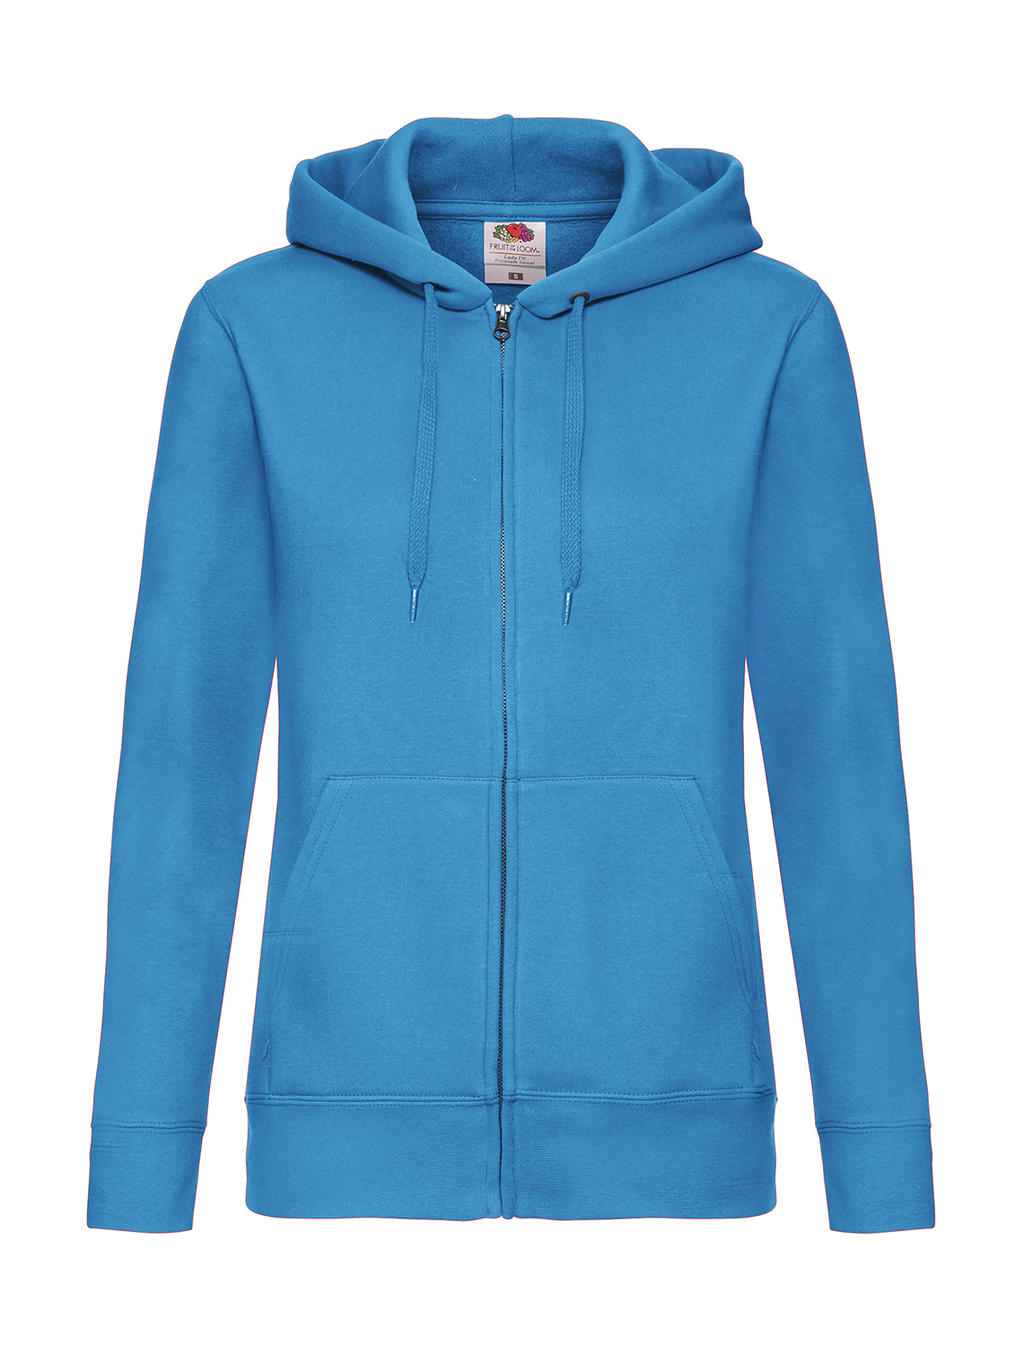  Premium Hooded Sweat Jacket Lady-Fit in Farbe Azure Blue